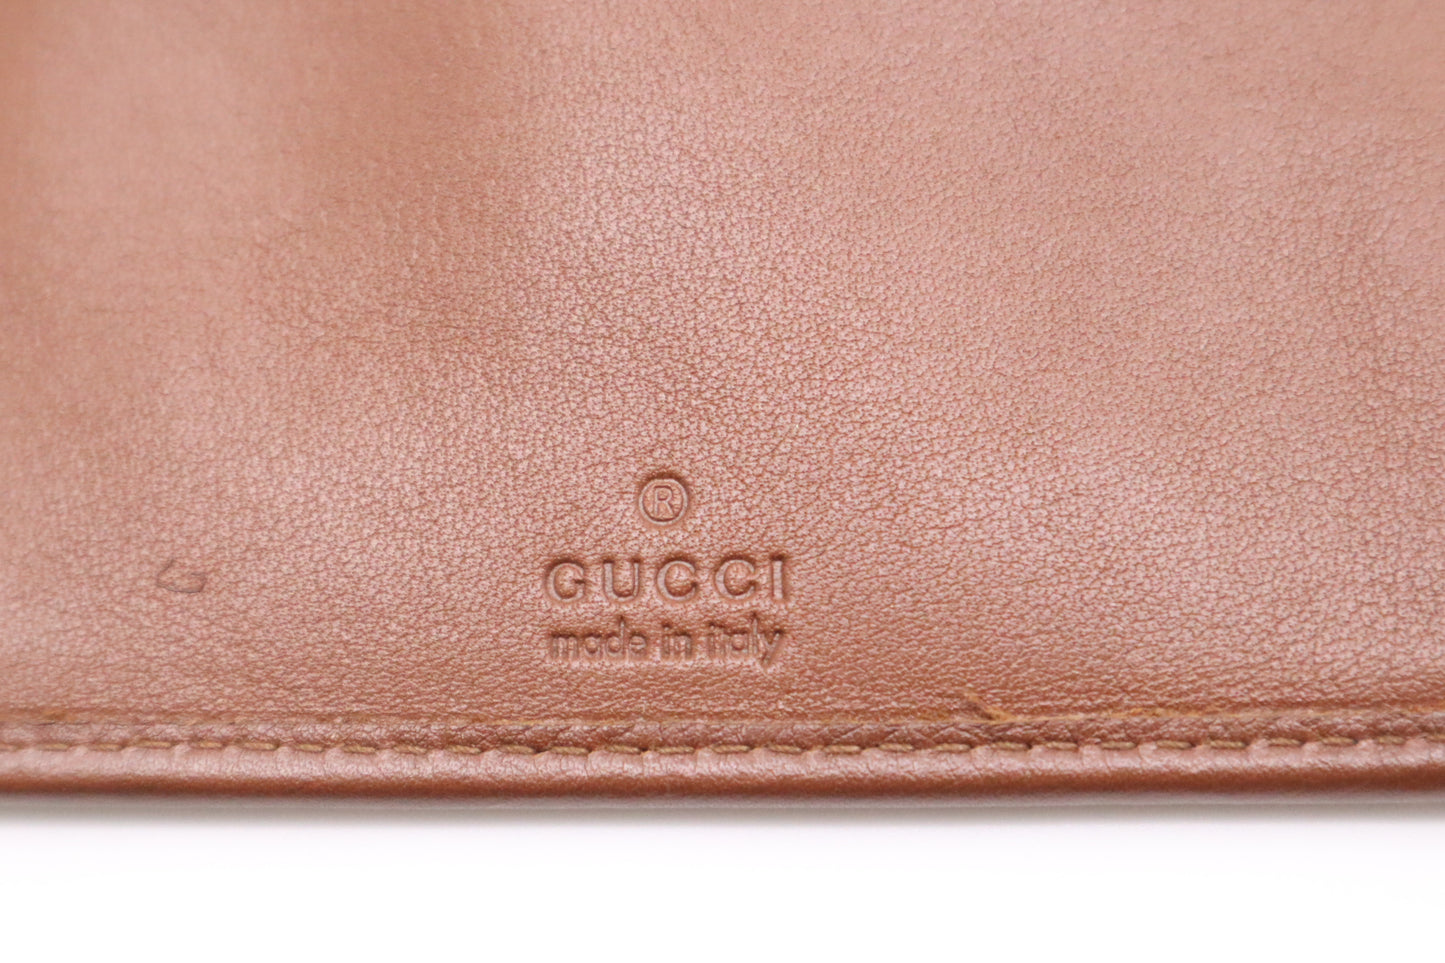 Gucci Bifold Wallet in Brown Leather